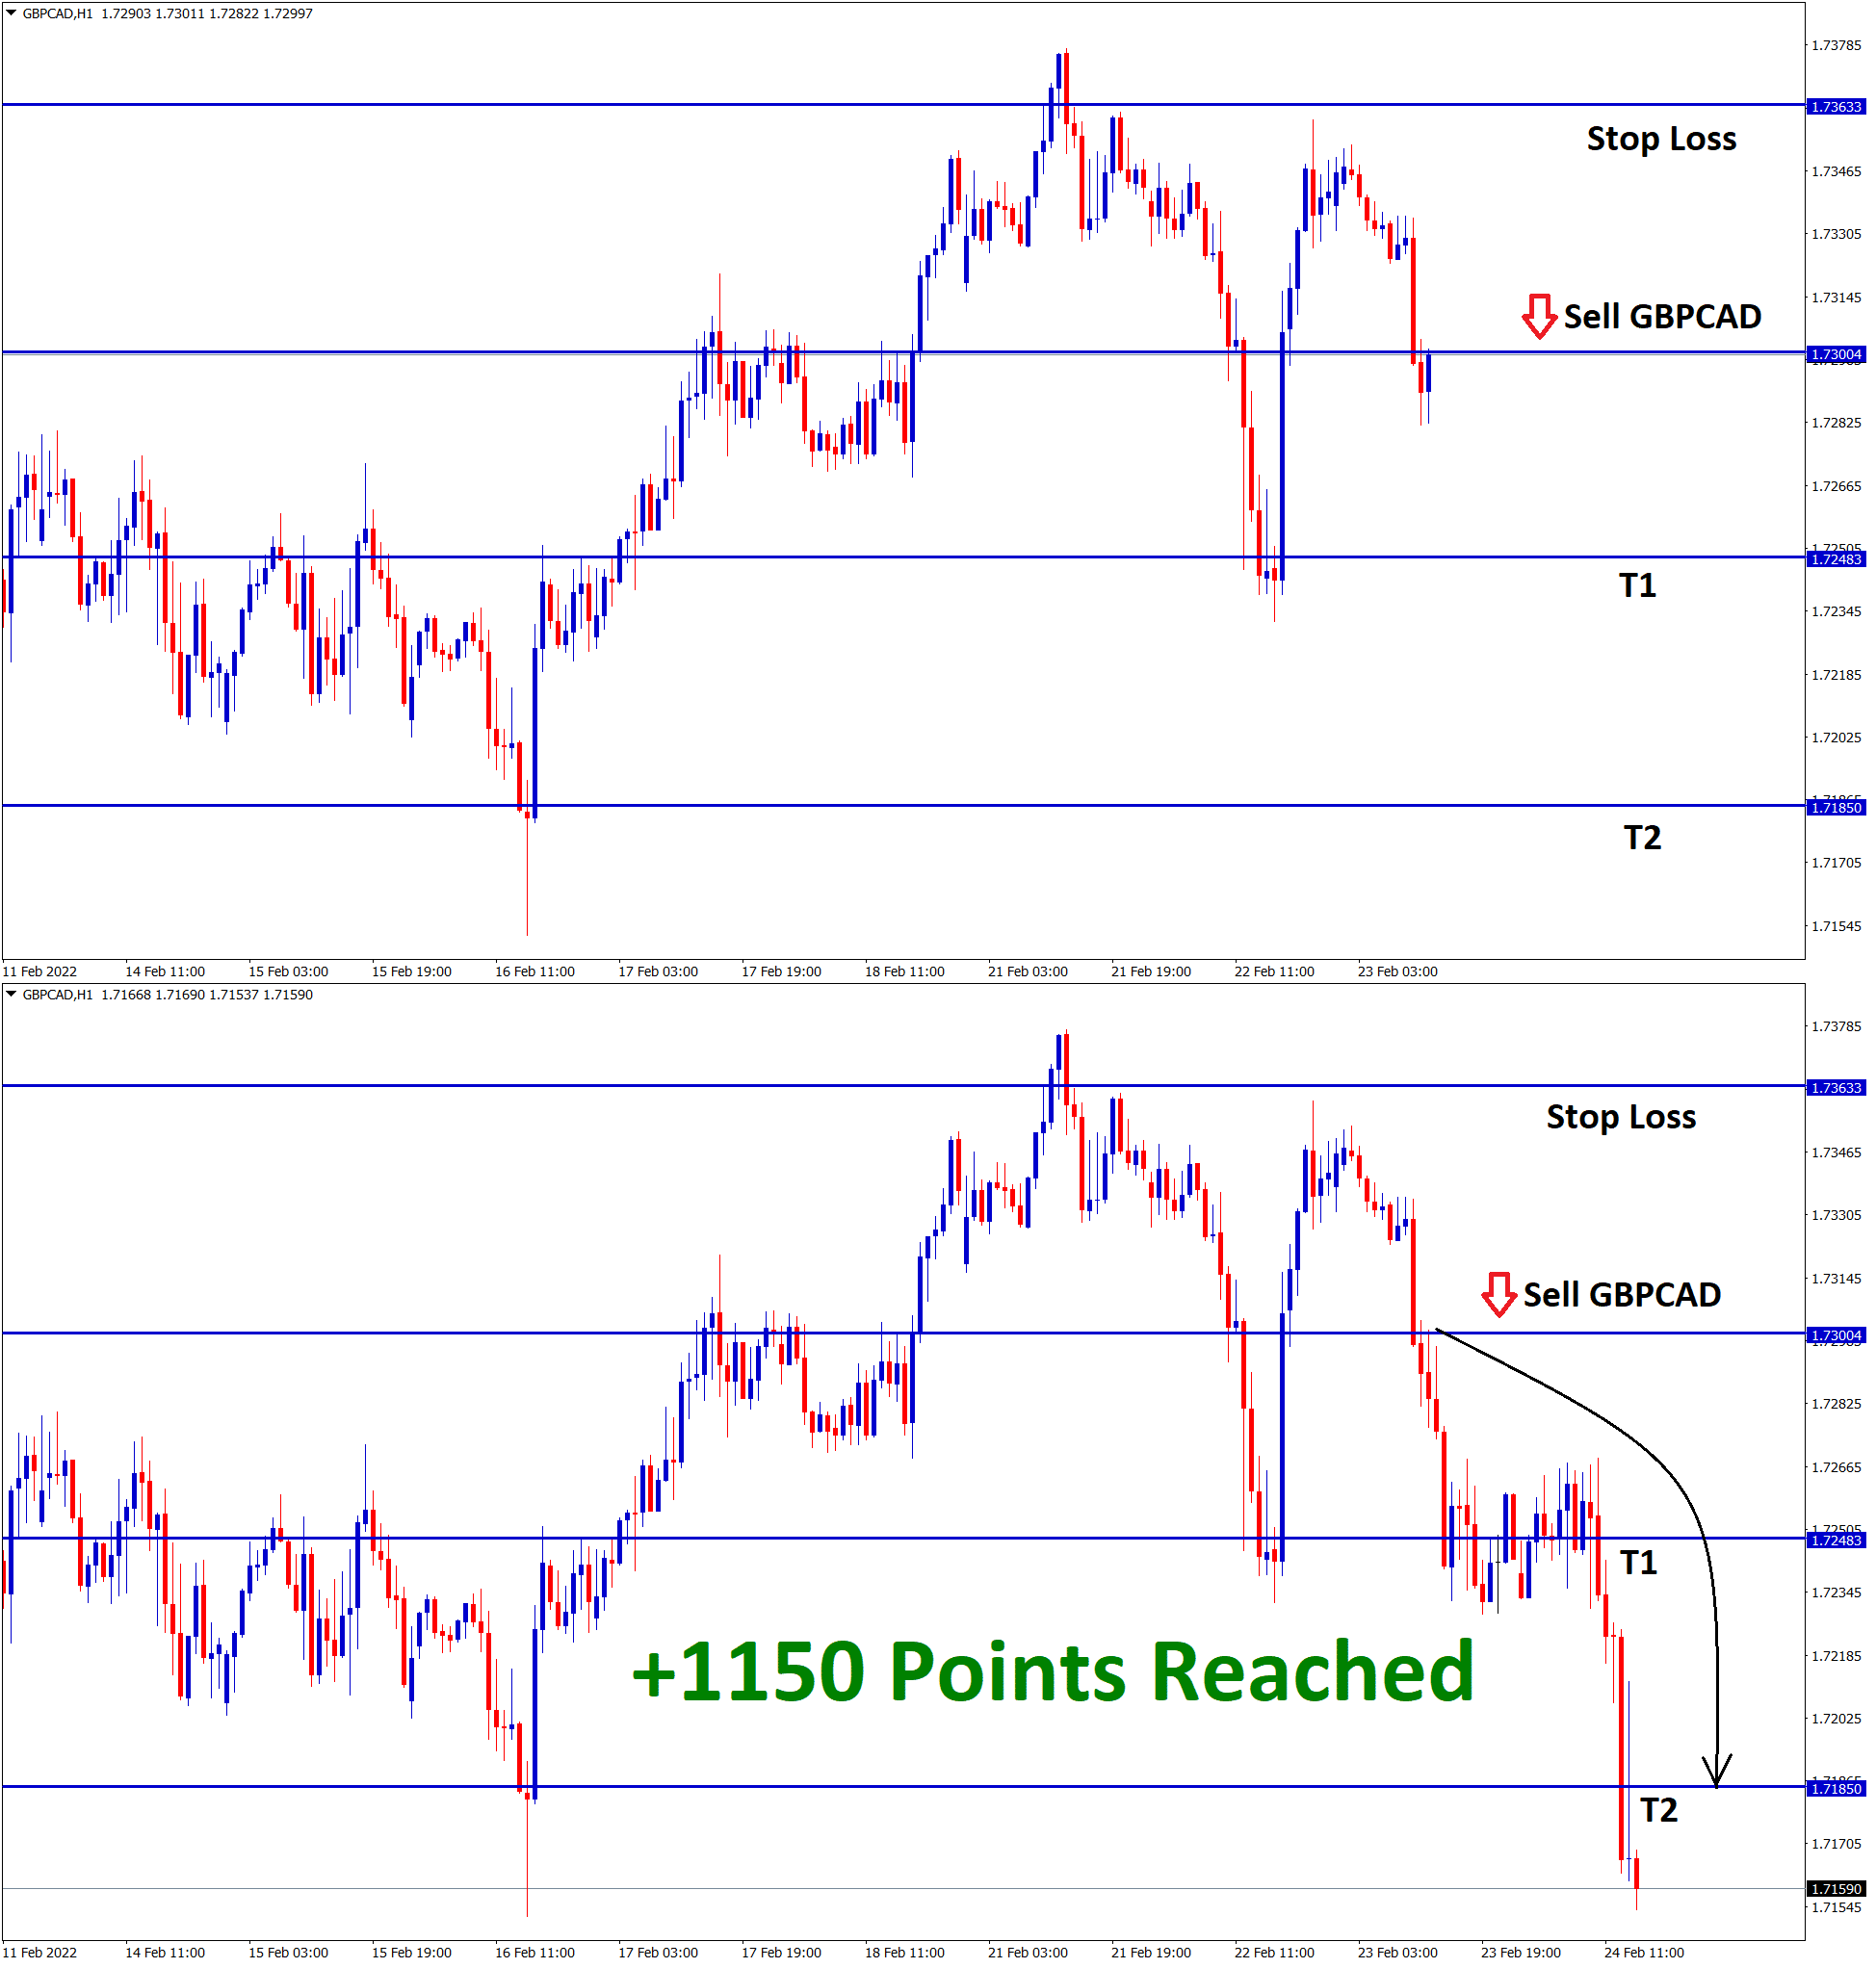 1150 points reached in GBPCAD sell signal